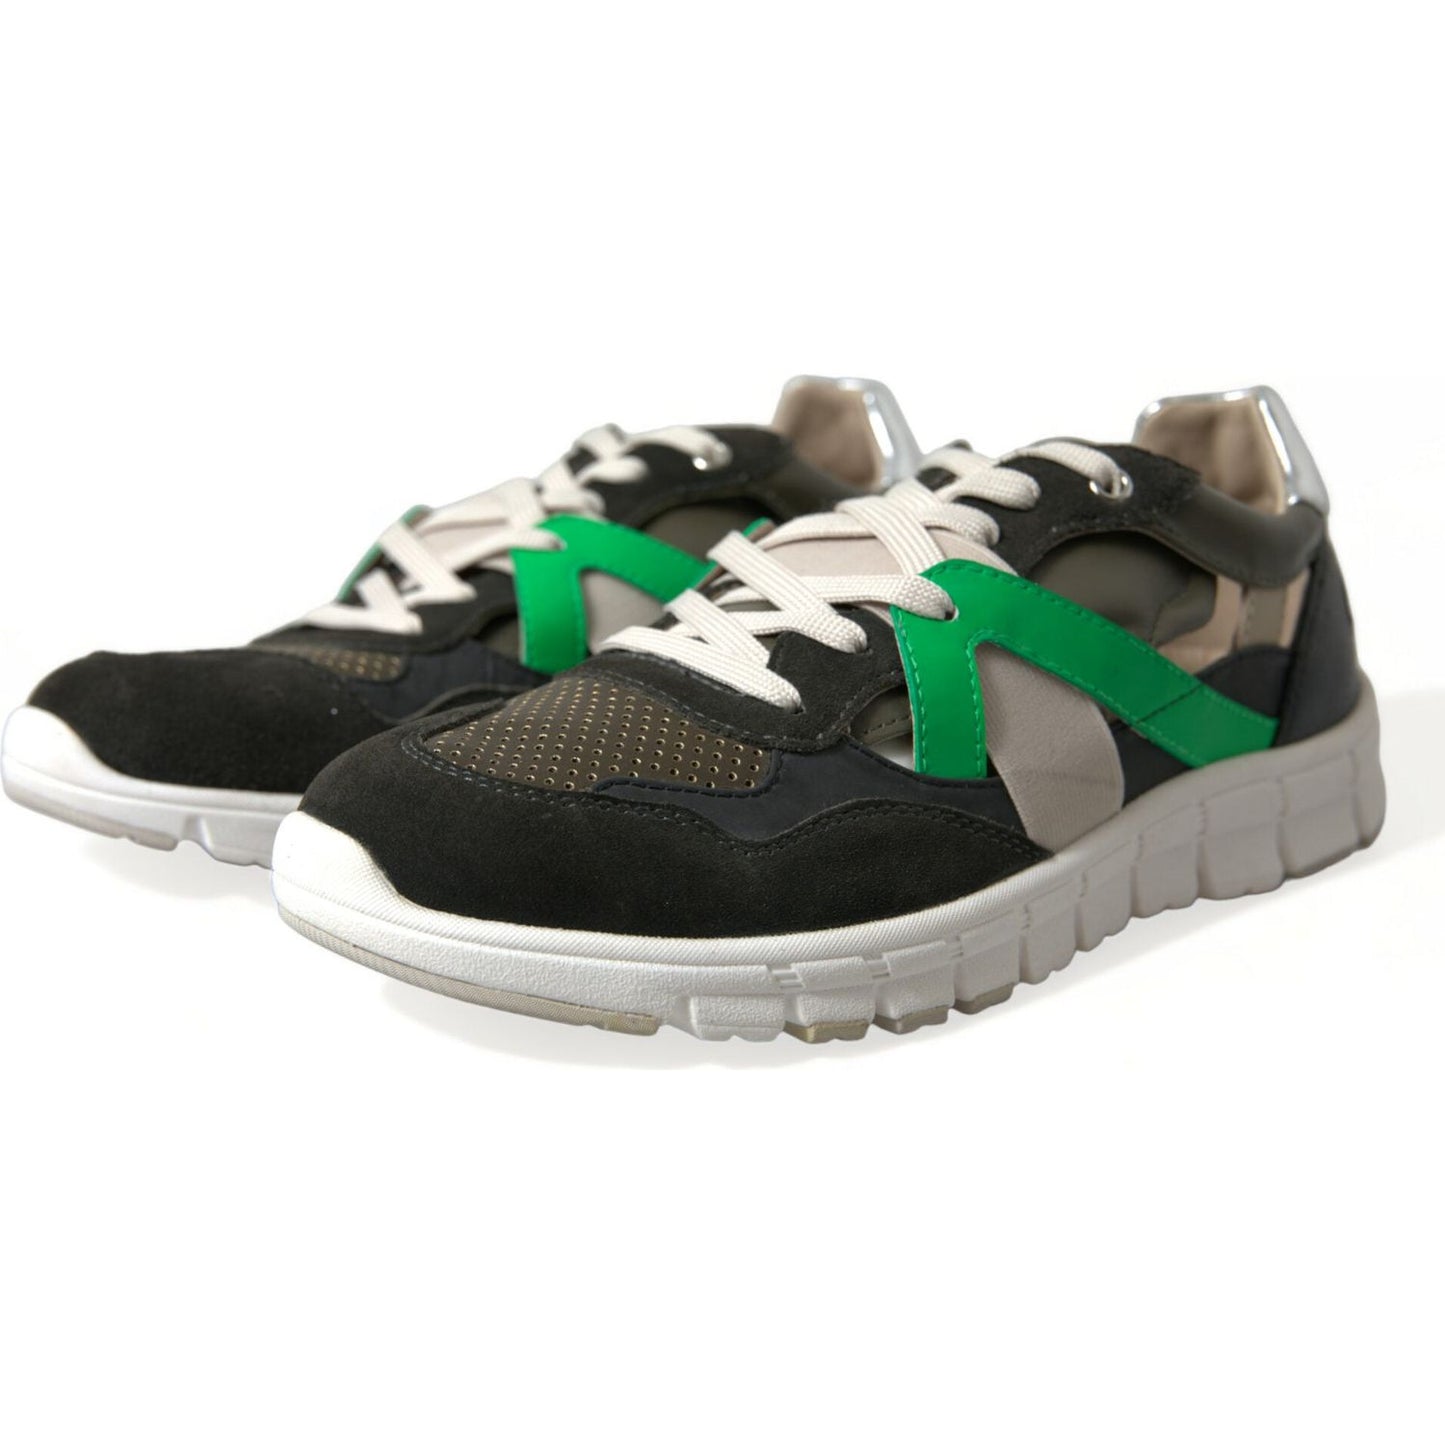 Dolce & Gabbana Exquisite Multicolor Low-Top Designer Sneakers multicolor-leather-suede-low-top-sneakers-shoes